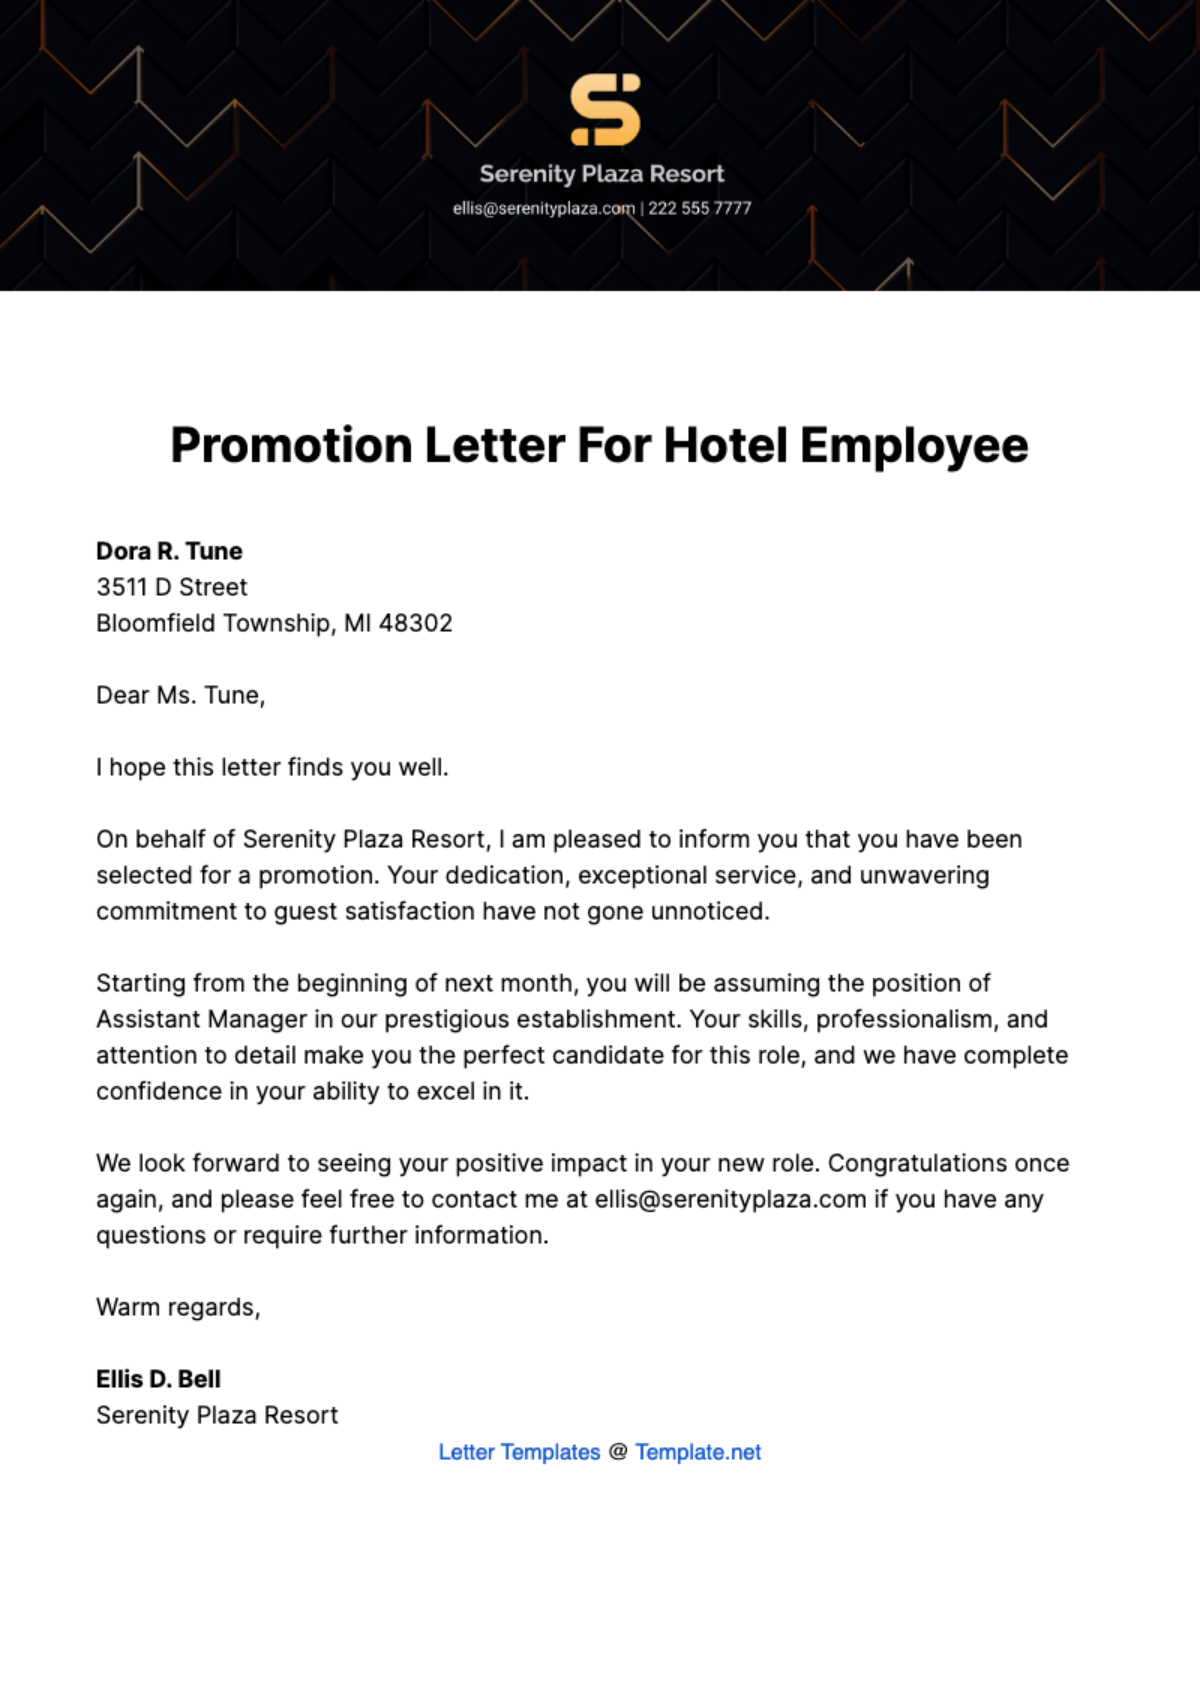 Free Promotion Letter for Hotel Employee Template